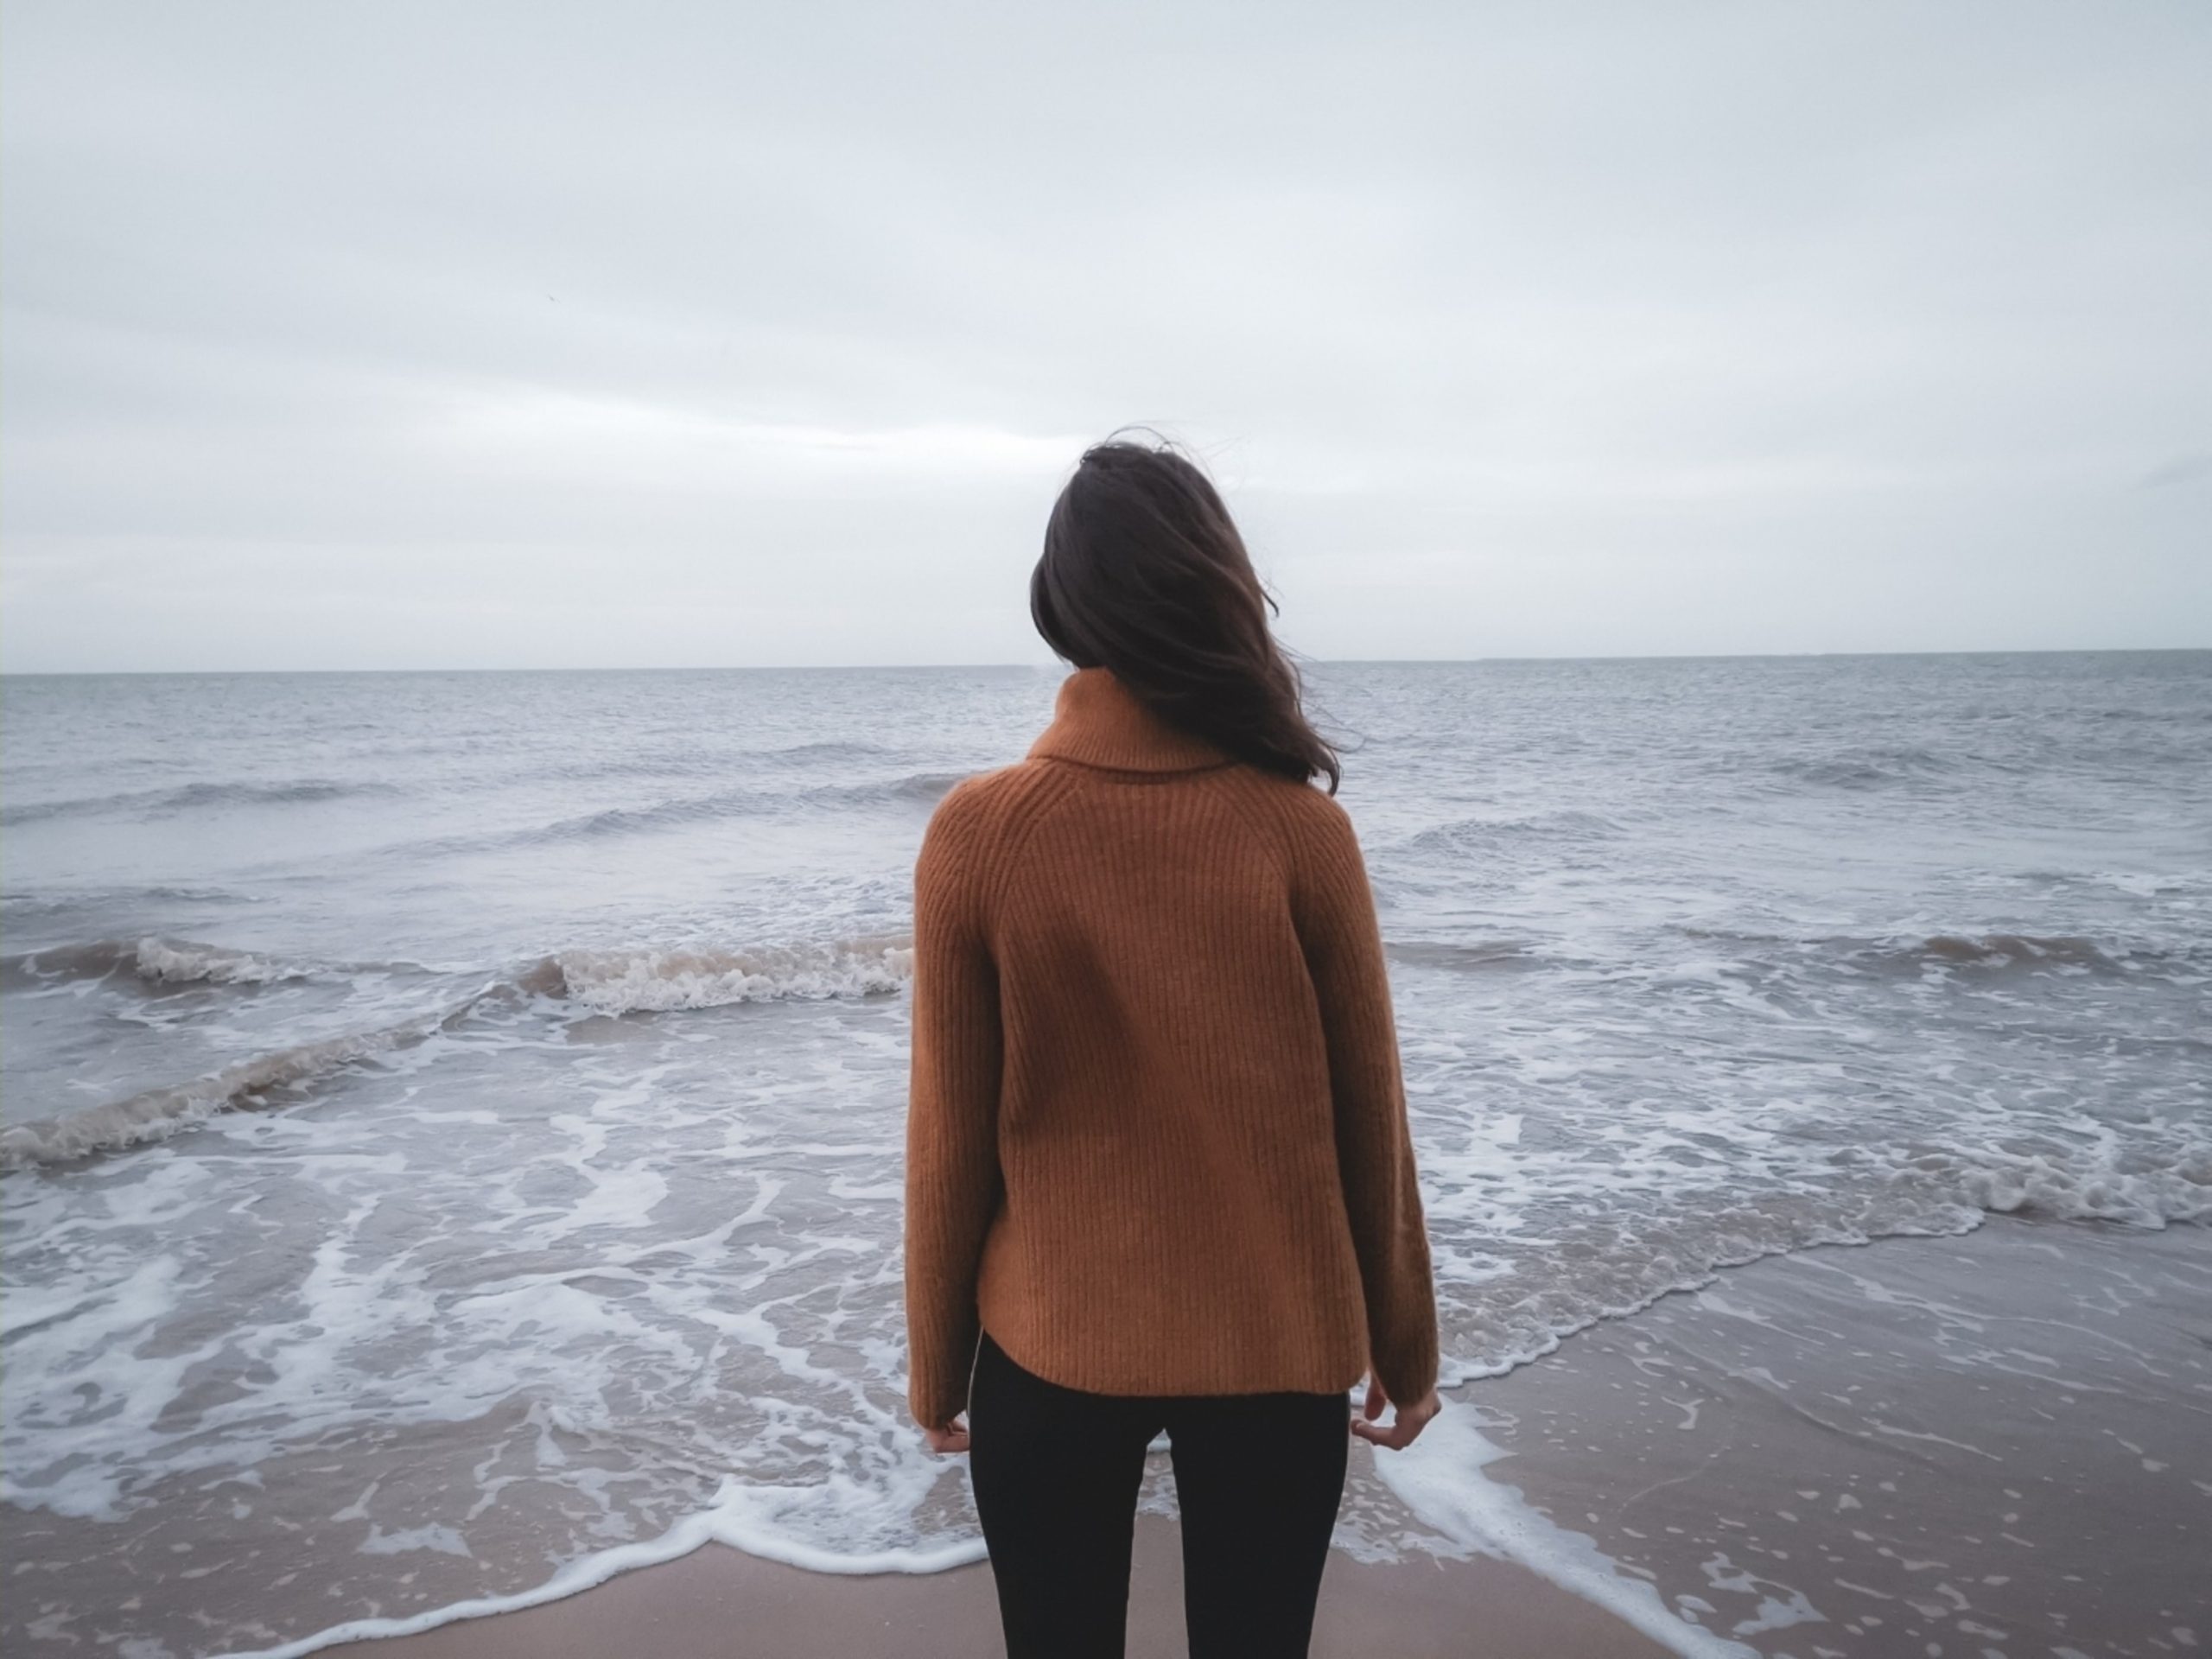 Woman with Anxiety staring out into the ocean